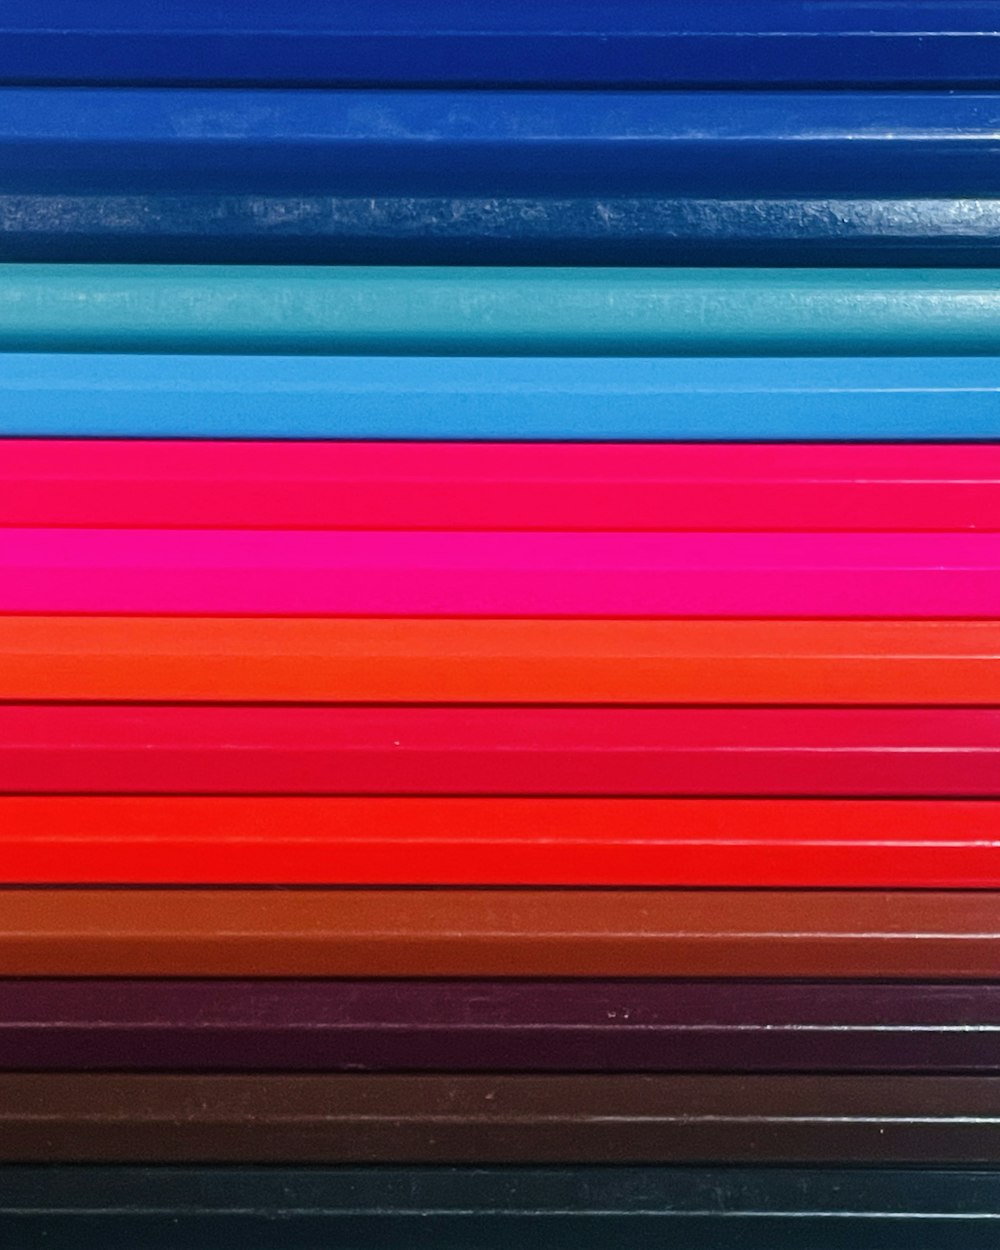 a stack of colored pencils sitting on top of each other